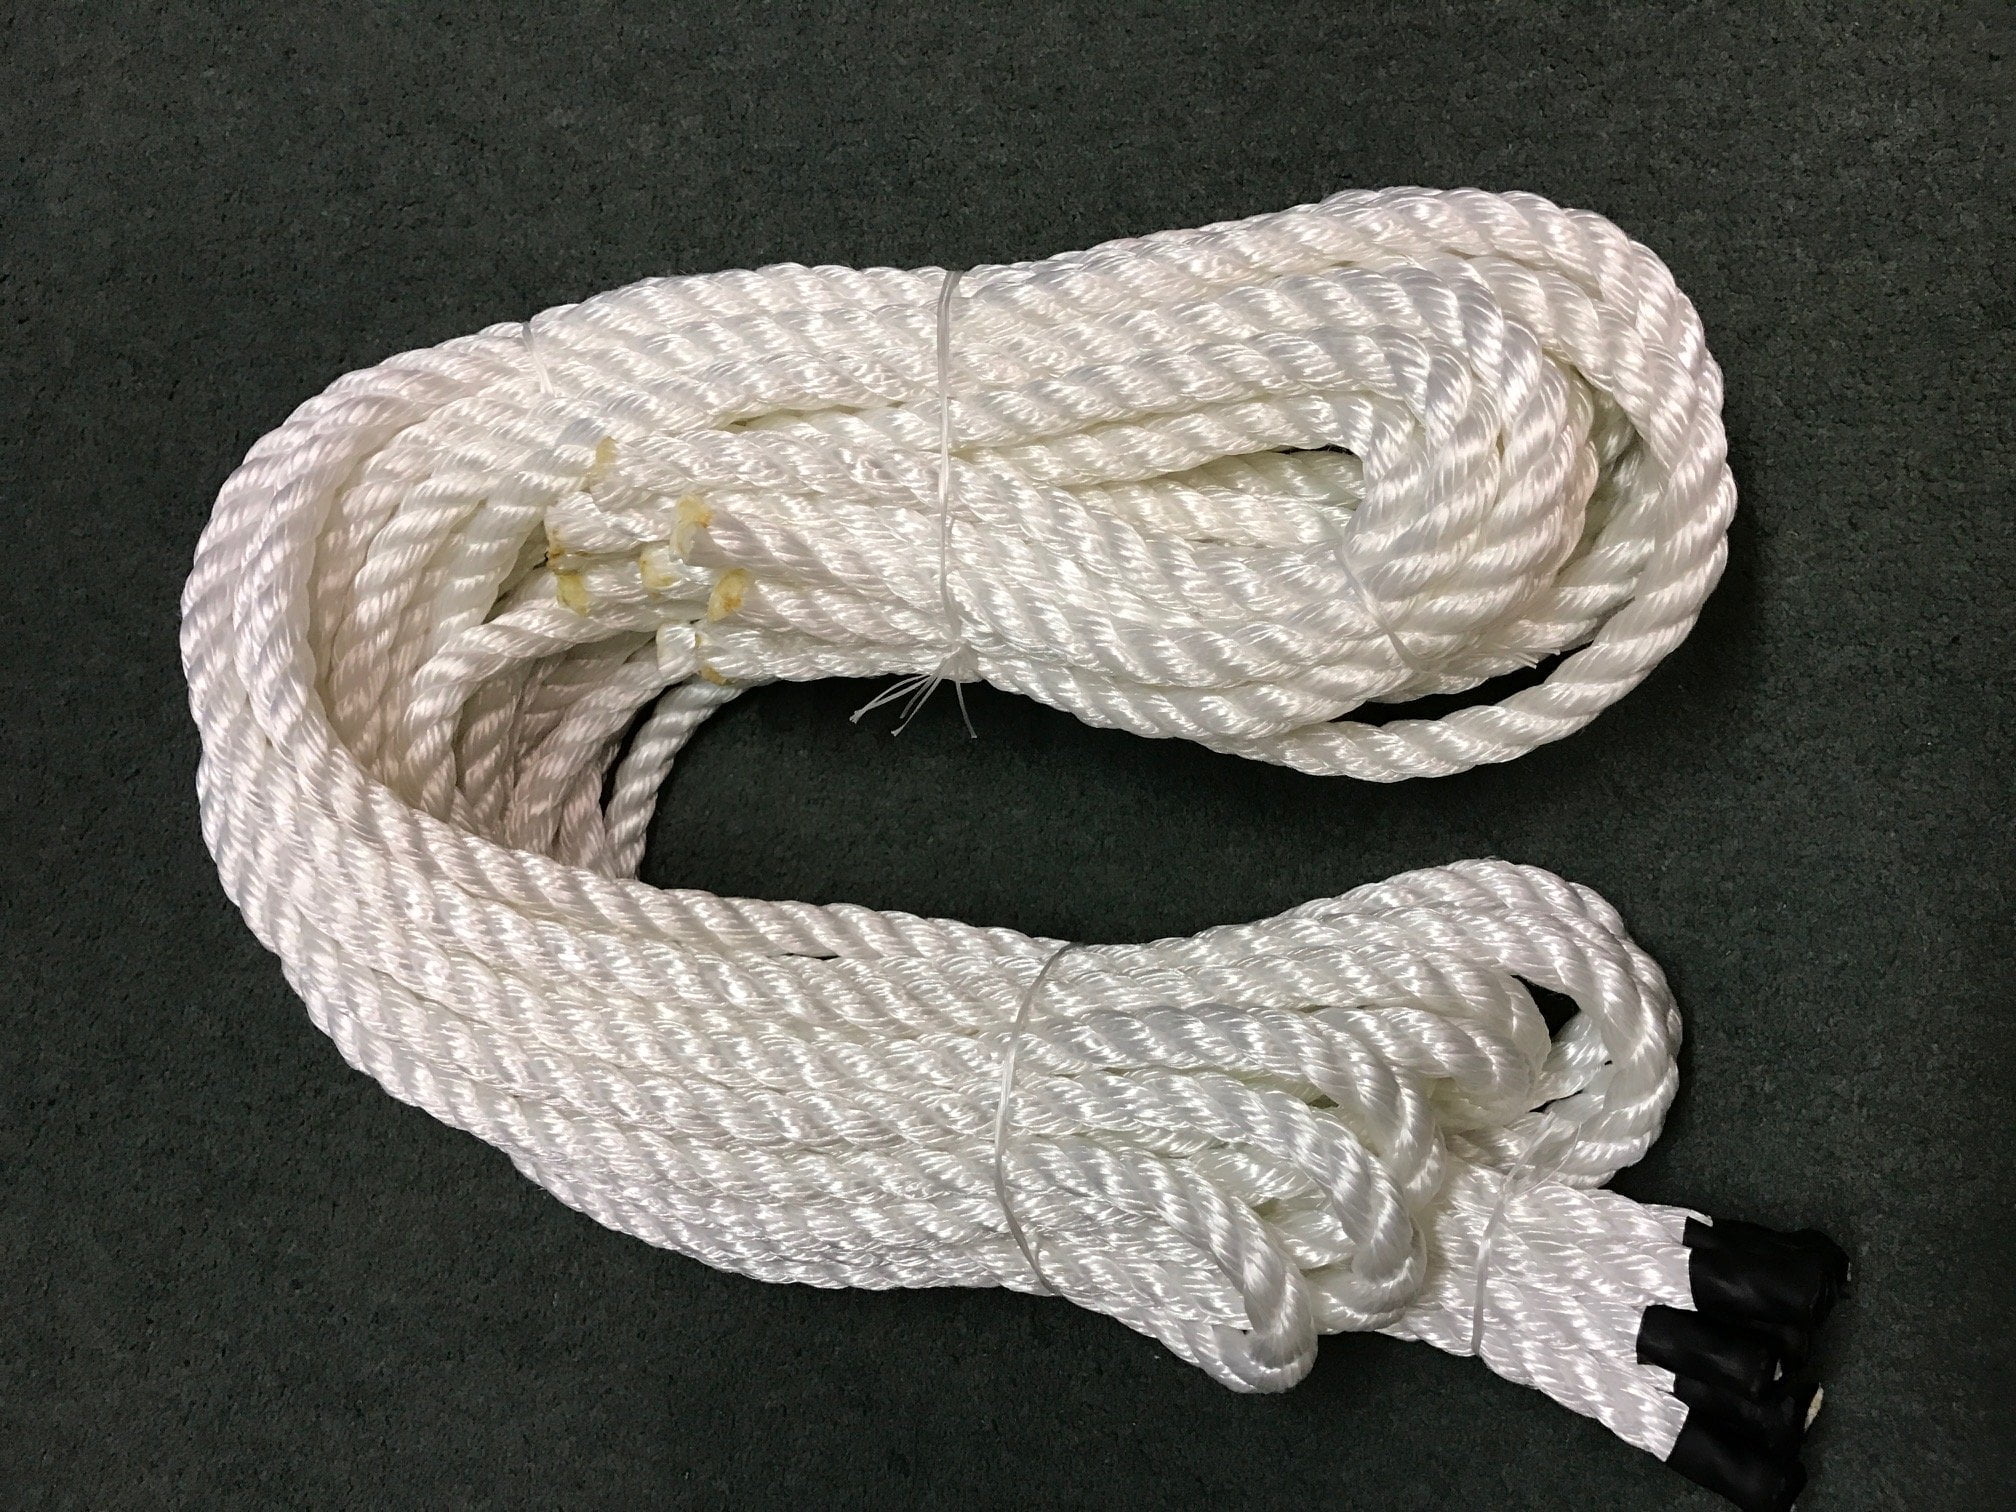 30kn Rigging Ropes